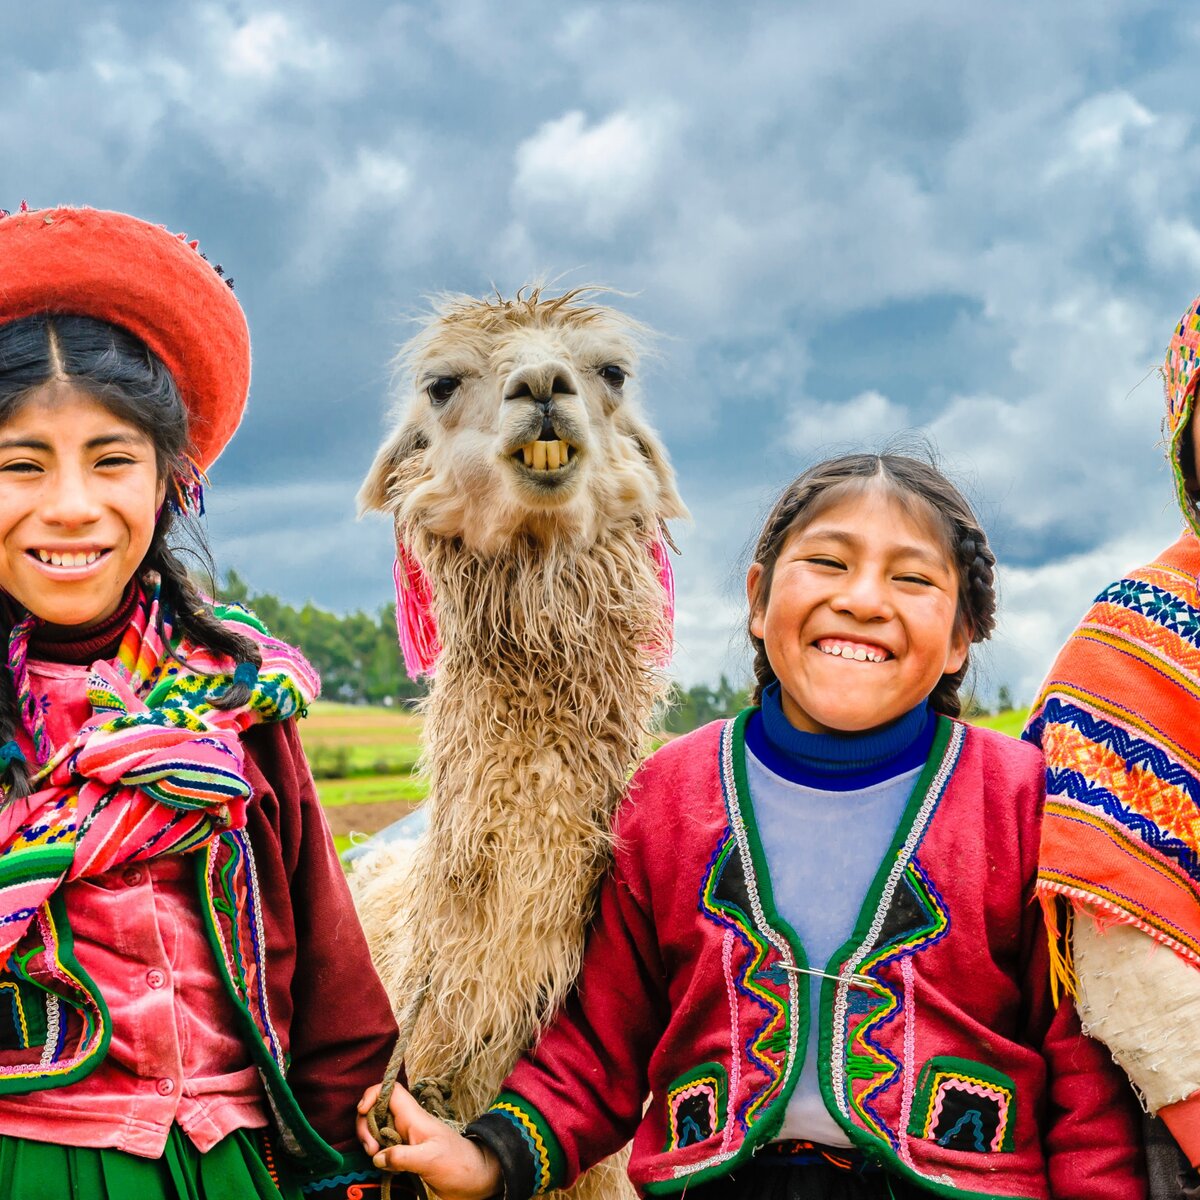 Group of children with Llama